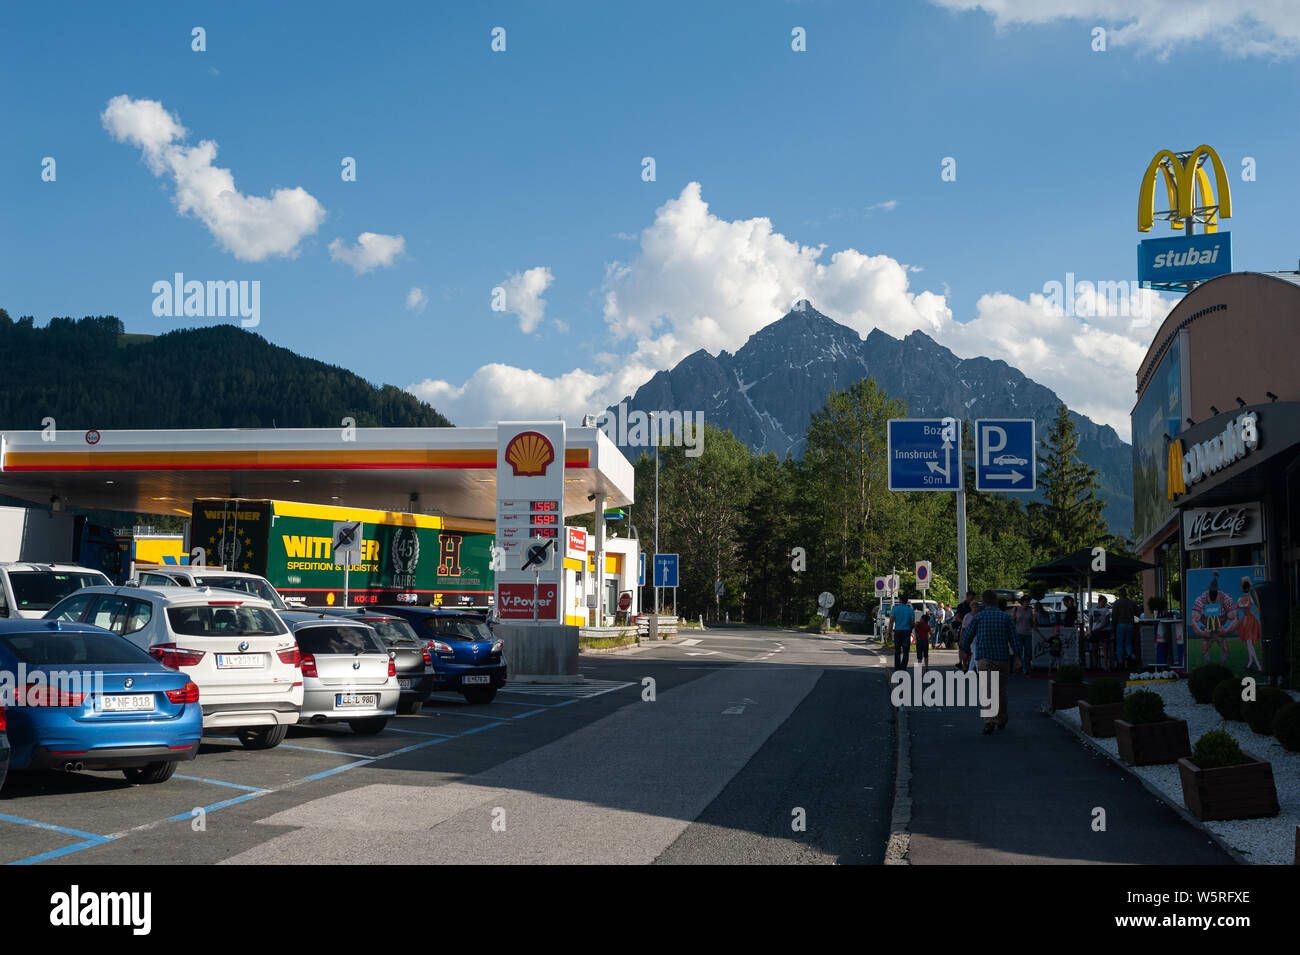 19.06.2019, Schoenberg, Tyrol, Austria, Europe - Service station at Stubaital along the Brenner Autobahn motorway with a view of The Alps. Stock Photo